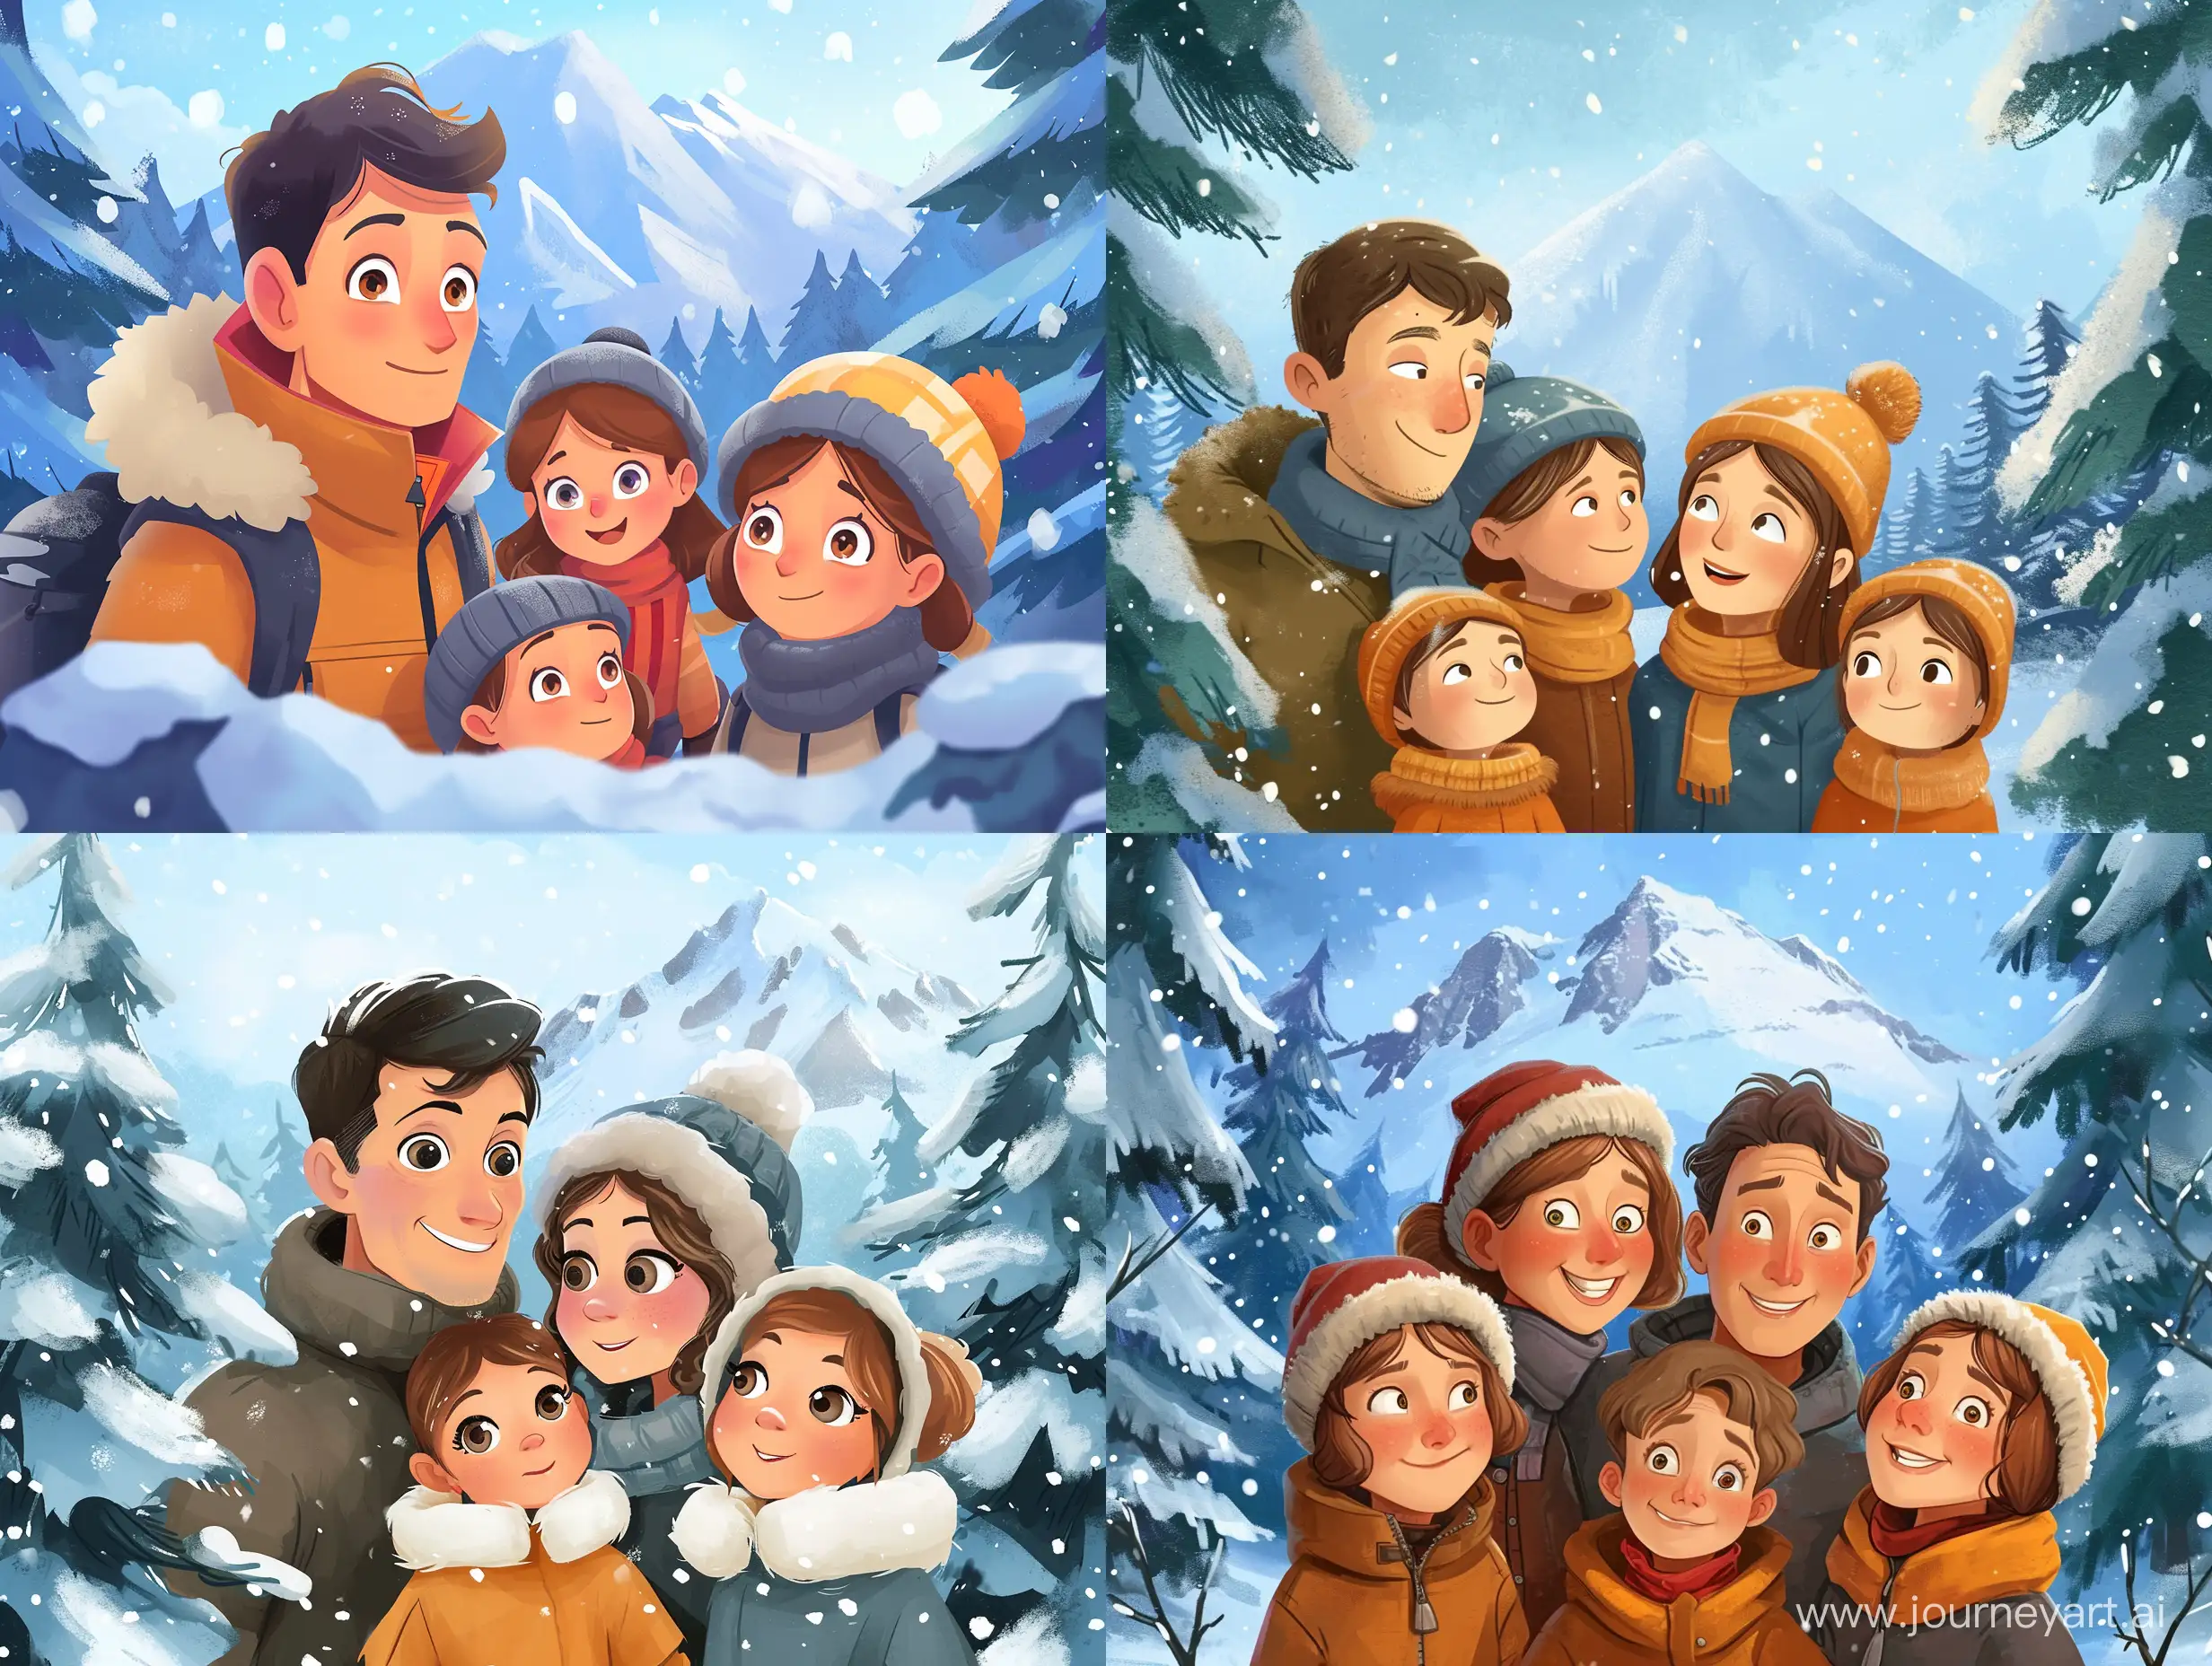 cute cartoon style. Family (mom dad and 2 kids) looking at us who is dressed in warm winter gear and in the background is a snowy mountain, and snowy fir trees